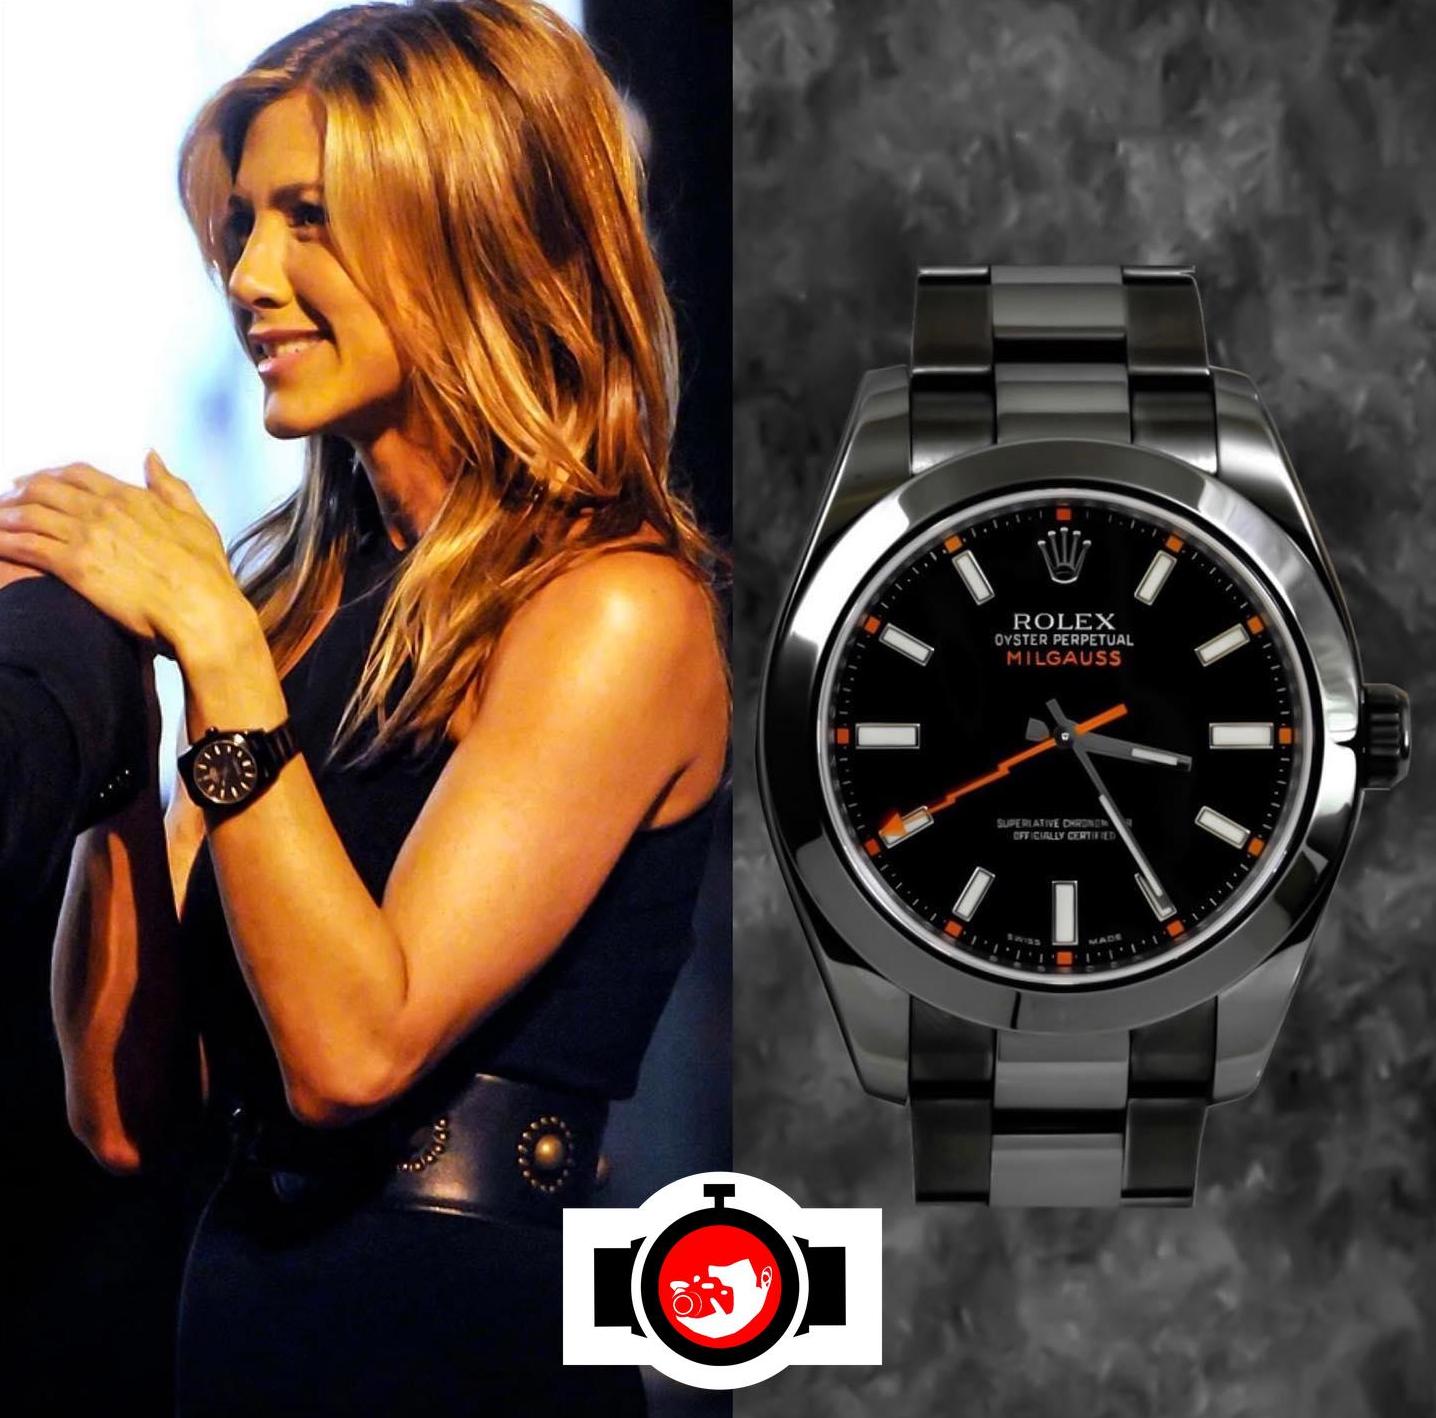 actor Jennifer Aniston spotted wearing a Rolex 116400